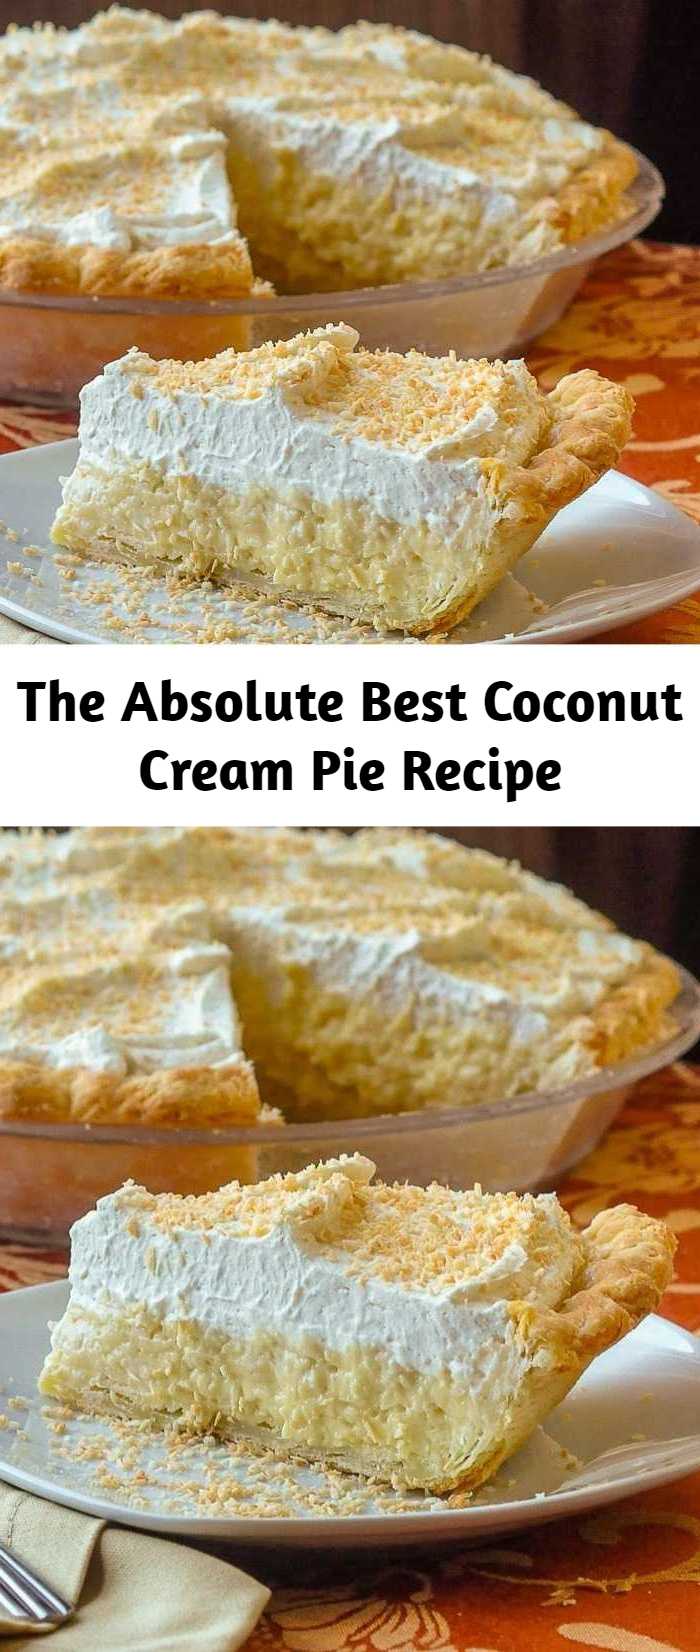 The Absolute Best Coconut Cream Pie Recipe - Truly the absolute best coconut cream pie. A creamy, old-fashioned coconut cream pie recipe. After decades of tasting many different pie recipes I have never had better than this luscious creamy pie… not even close.